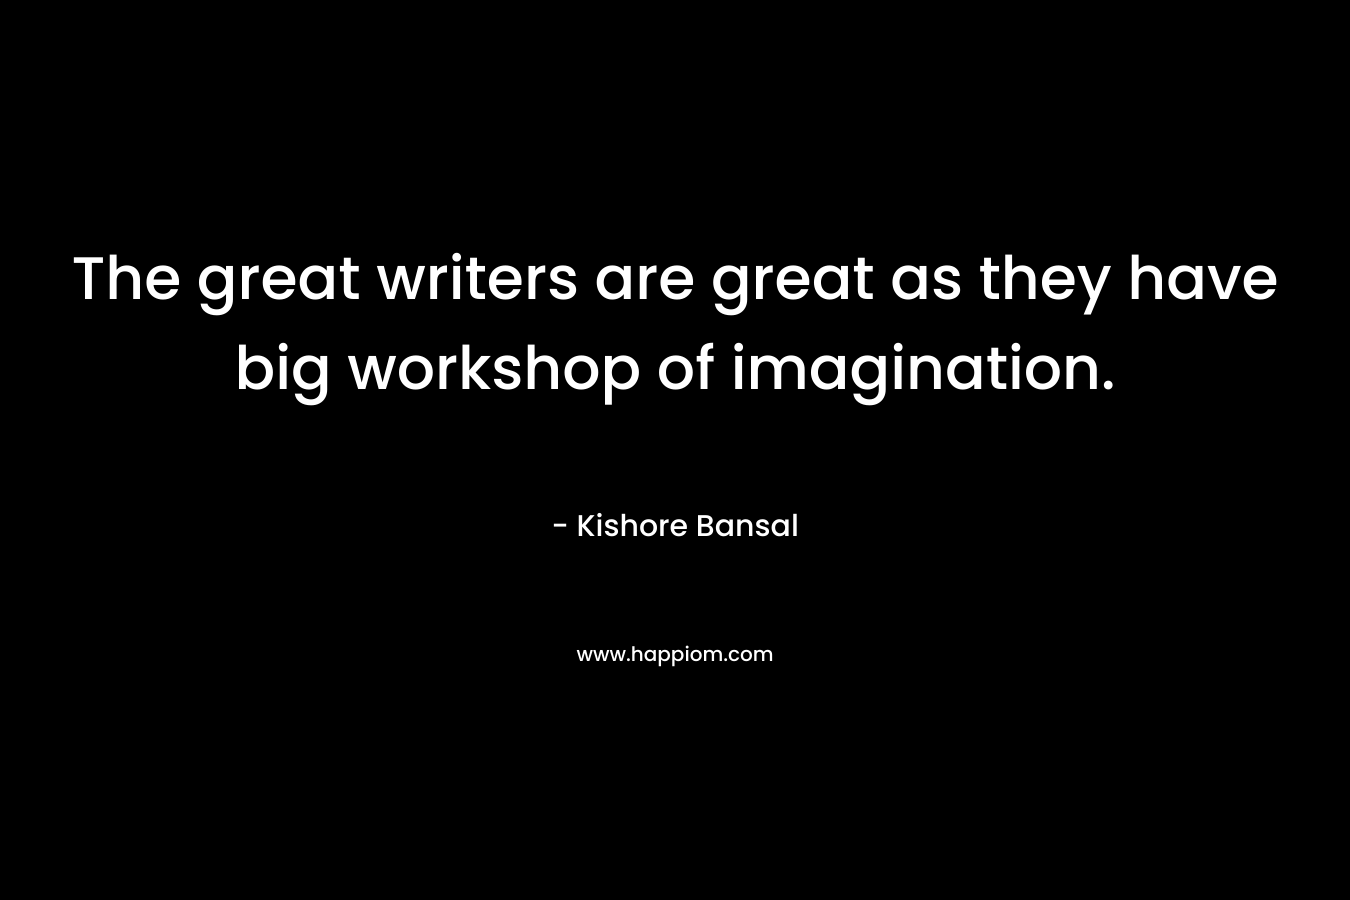 The great writers are great as they have big workshop of imagination.